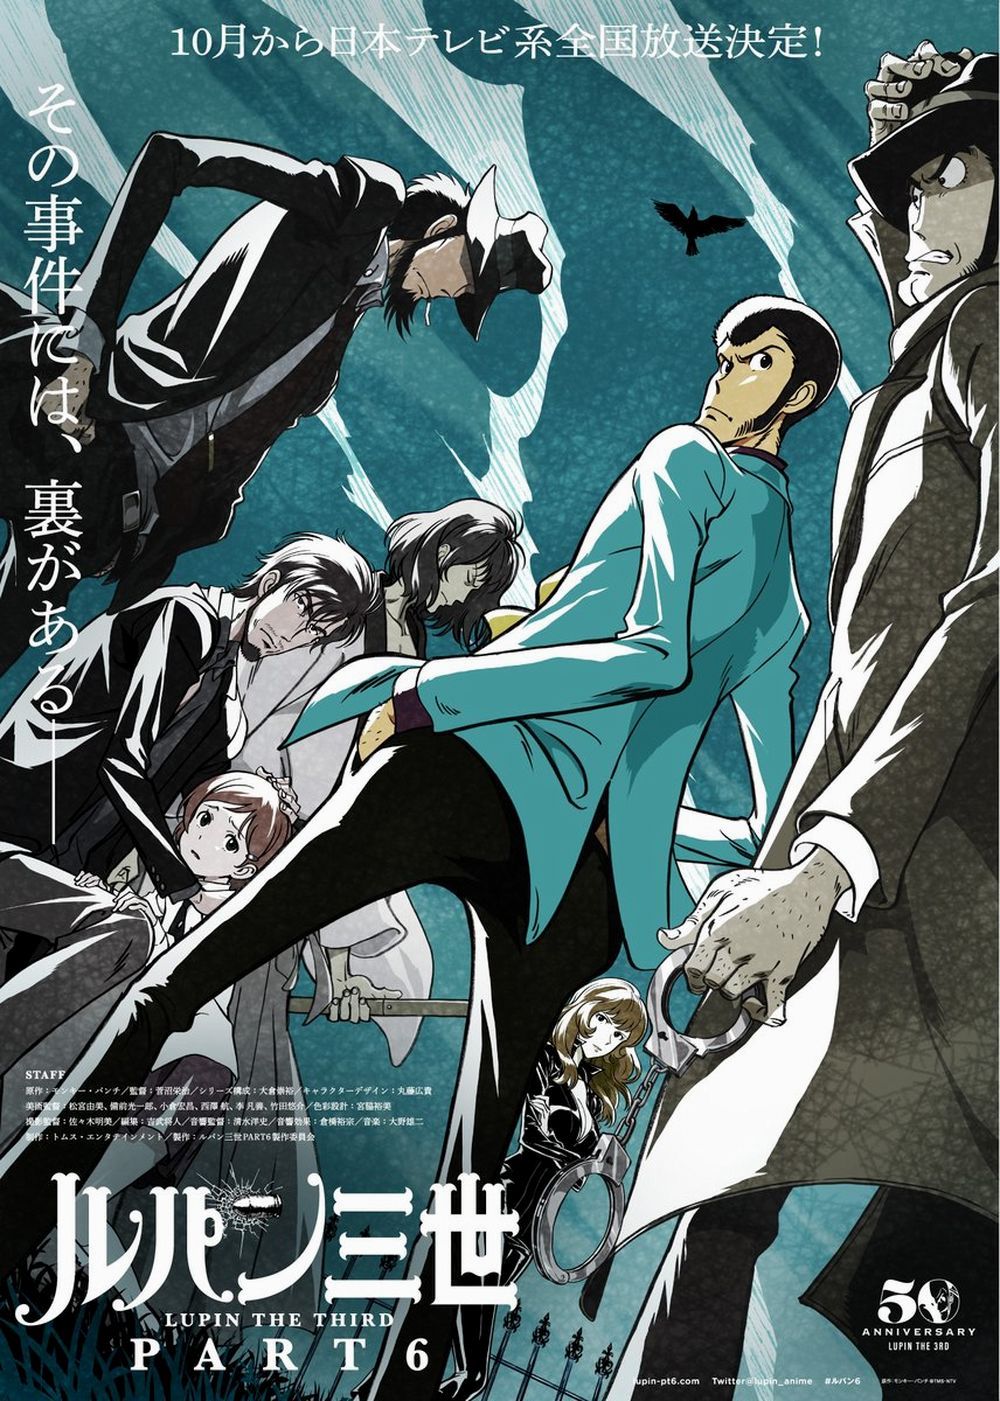 000lupin%20parte%206%20poster